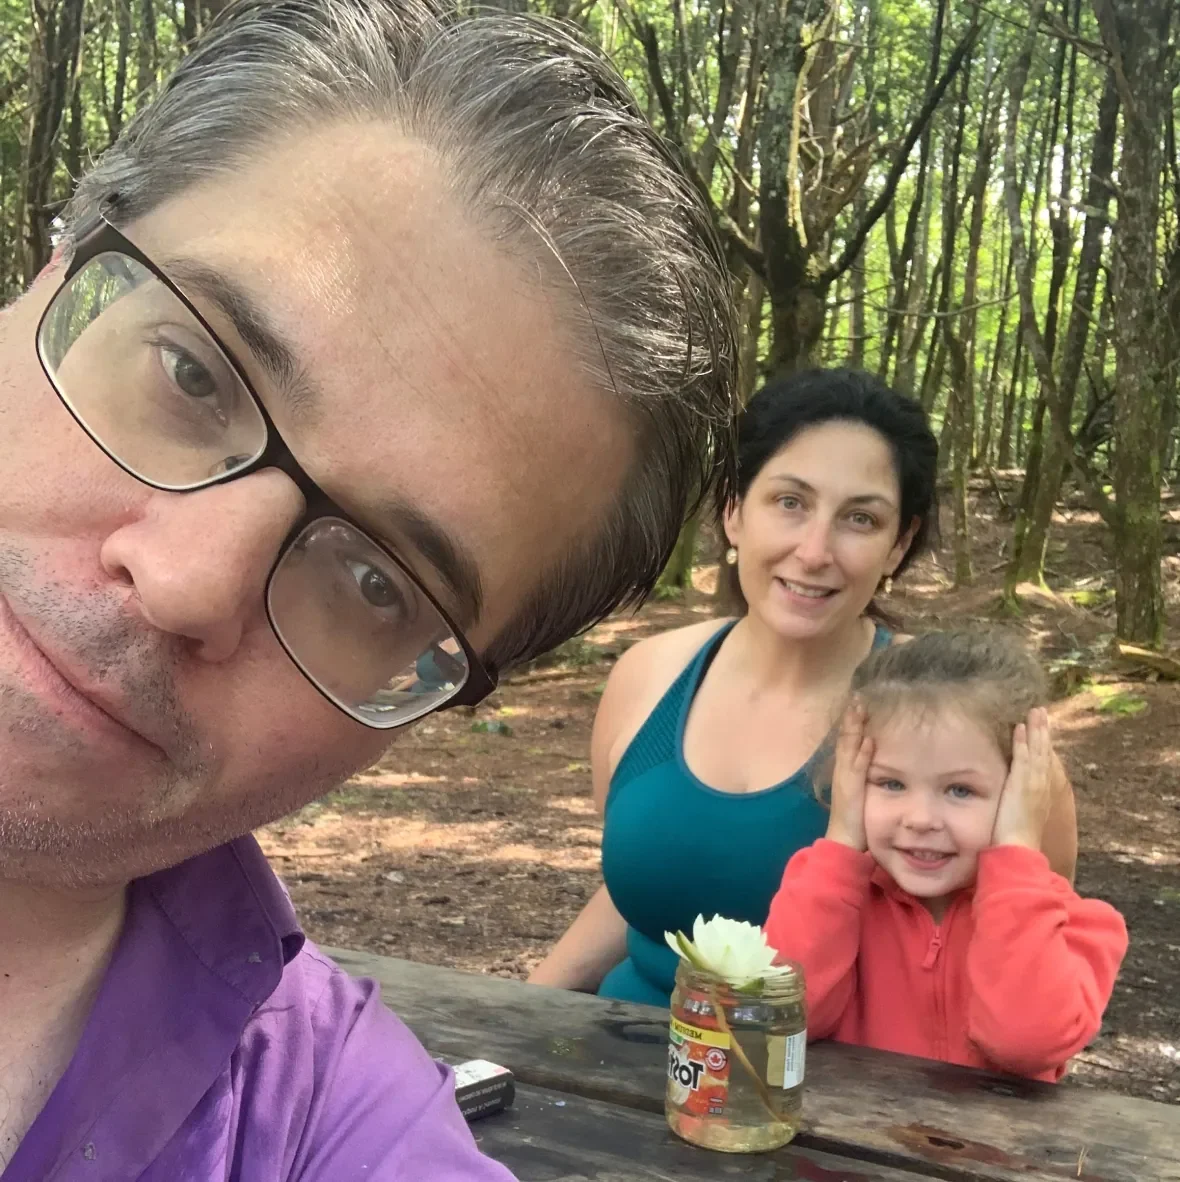 mark-gruchy-and-family/Submitted by Mark Gruchy via CBC